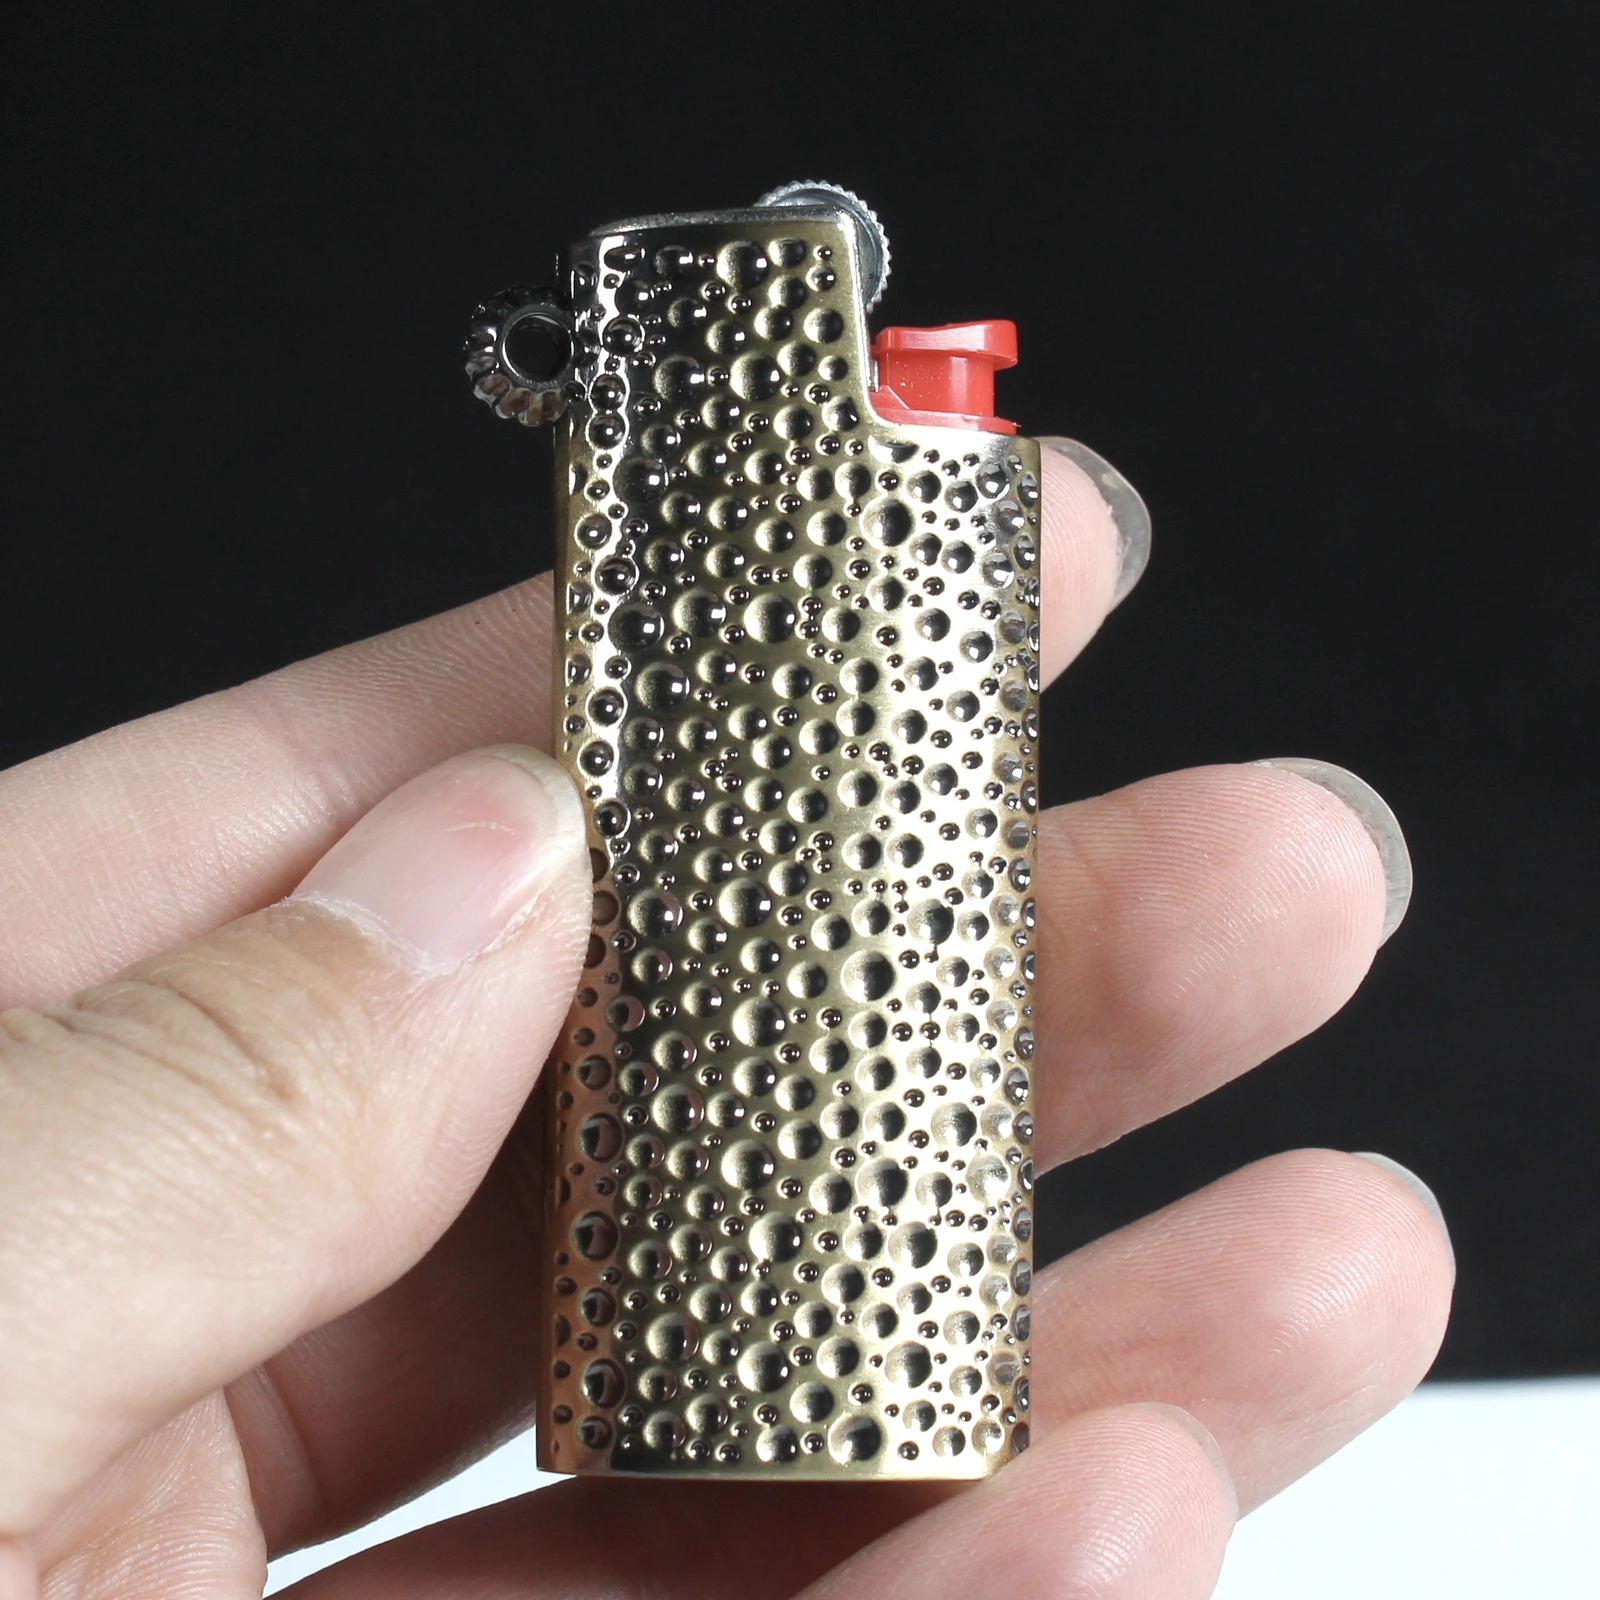 Mirror Metal Case For Bic Lighter Mini Small J5 J25 Model Keychain Bottle  Opener Telescopic Buckle Anti-Lost With Clip